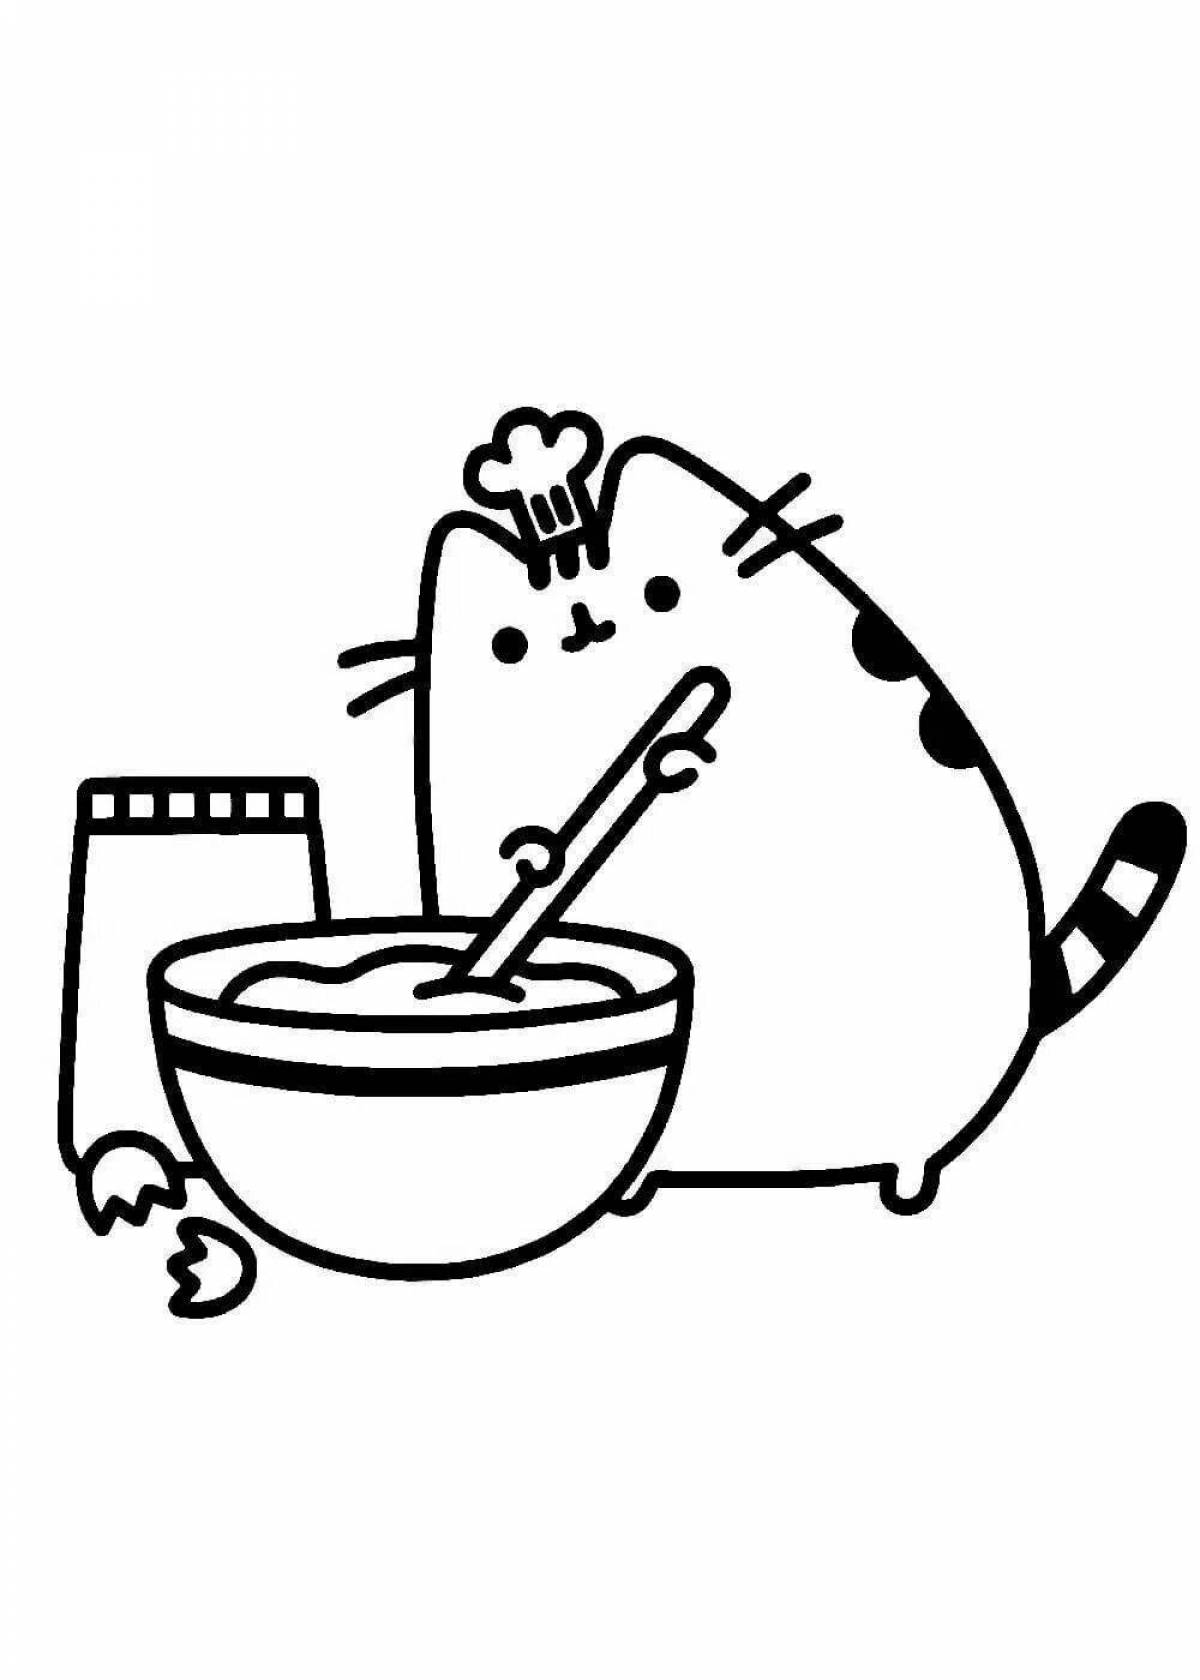 Coloring book smiling chubby cat